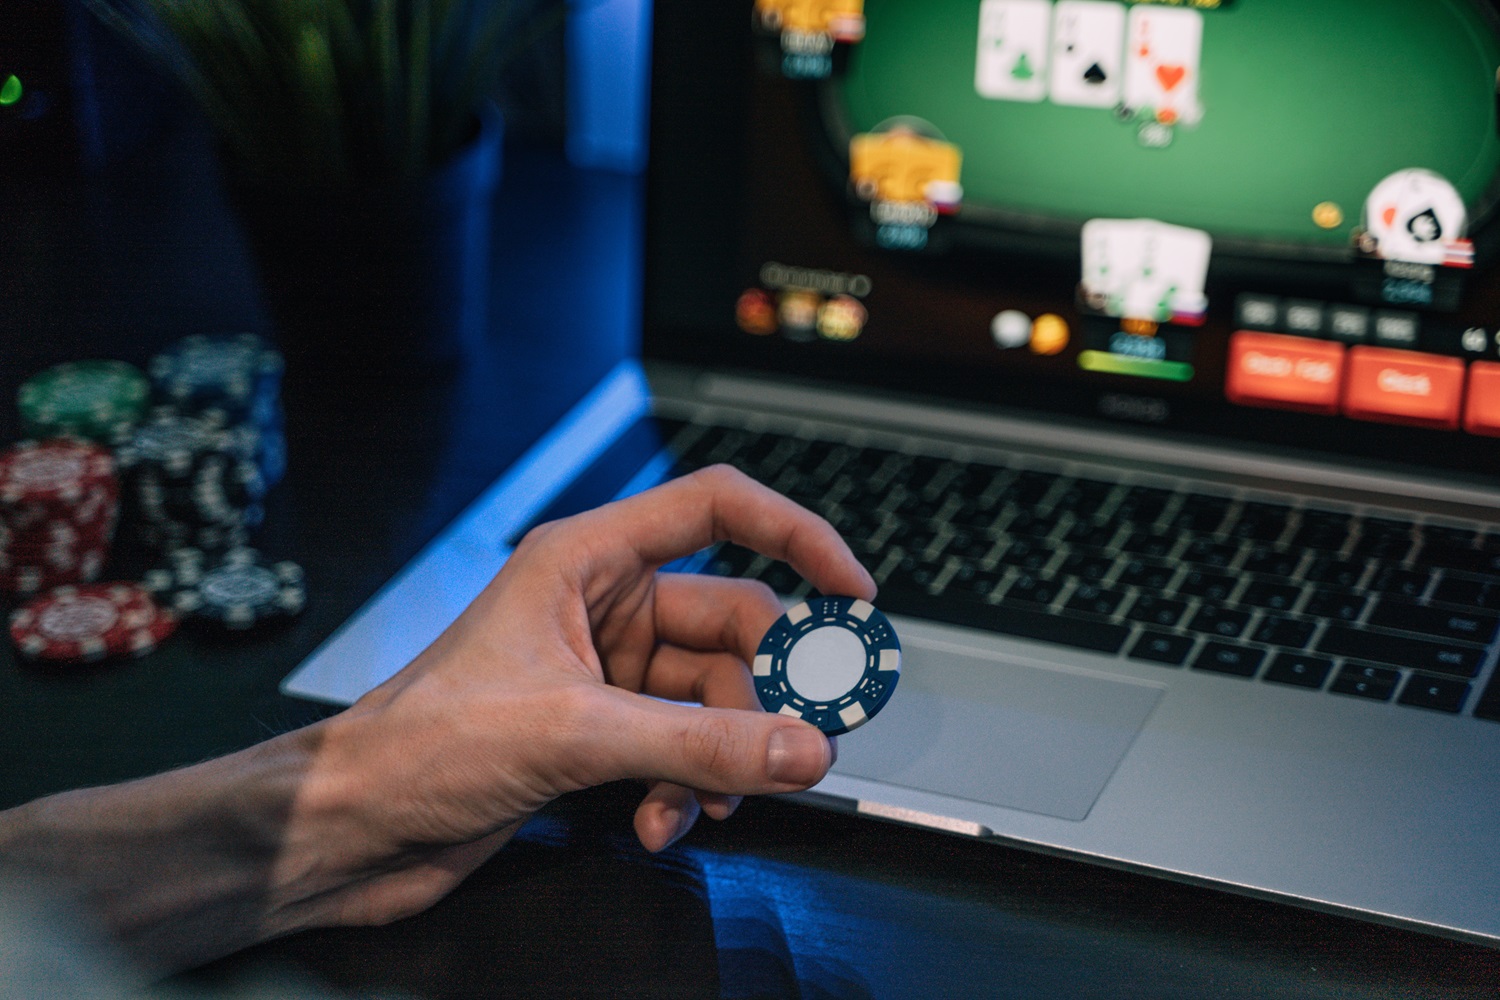 A human hand holds a casino chip in front of a laptop whose screen shows an online poker game.